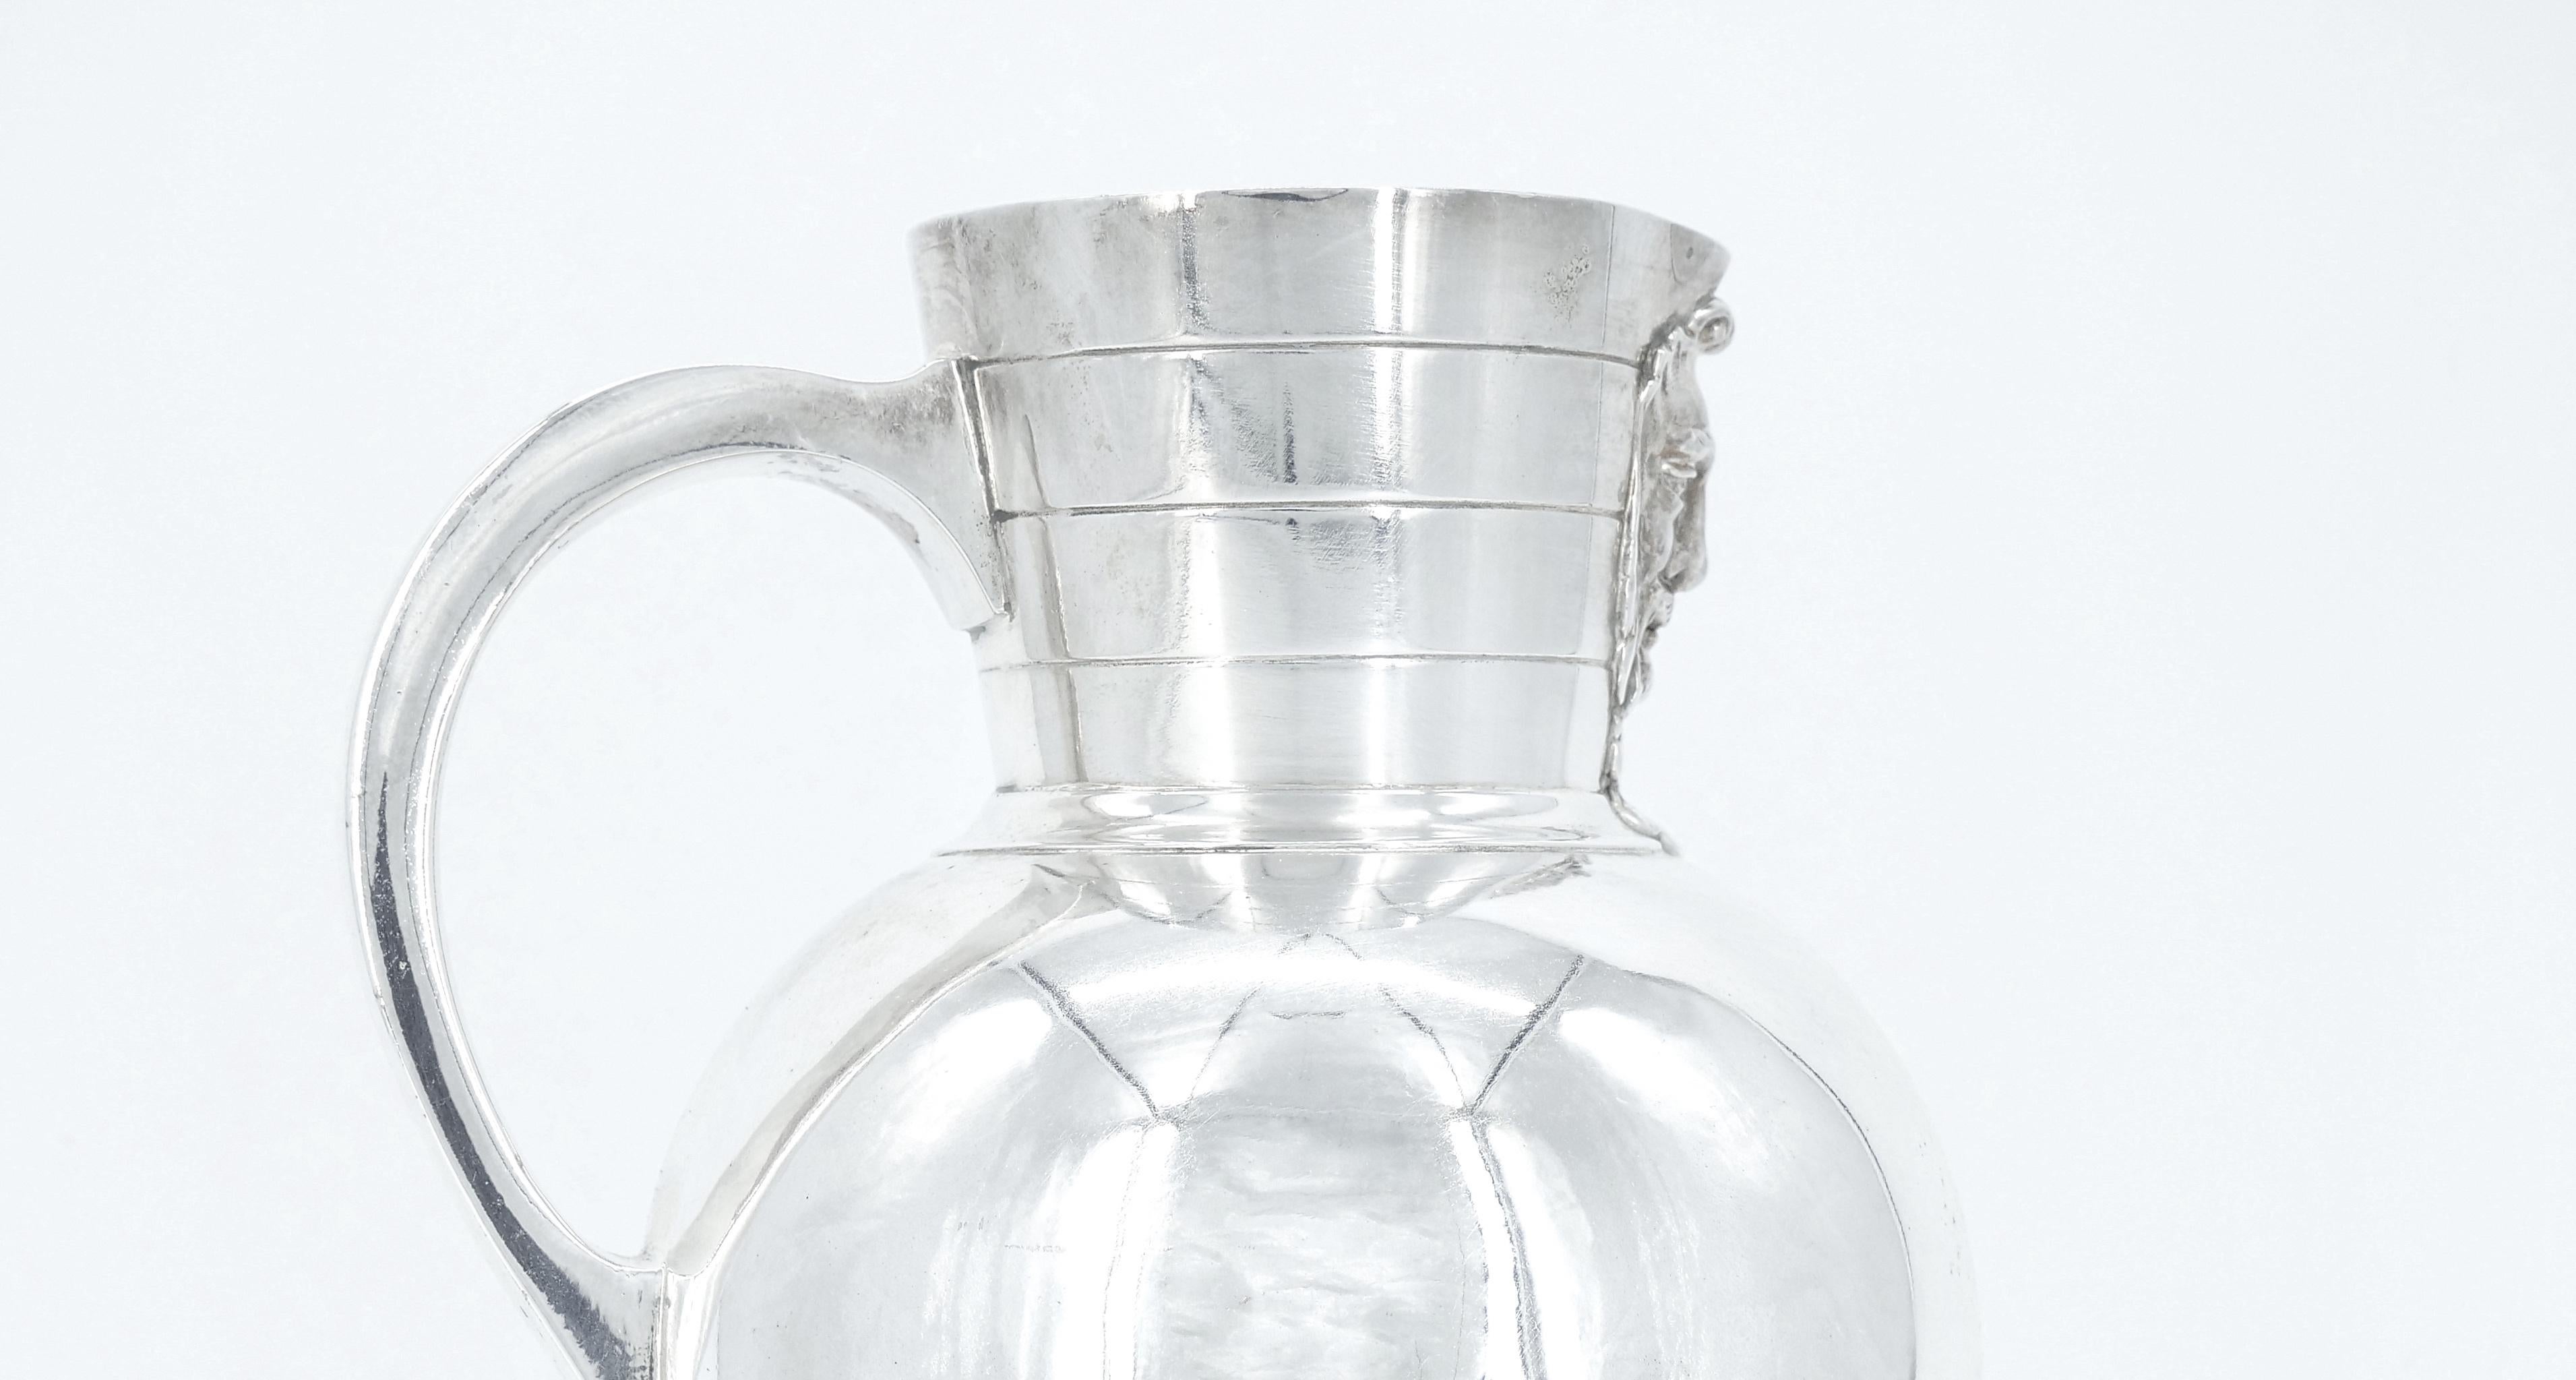 Step back in time with our exquisite late 19th century English silver plate water jug tableware serving pitcher. Crafted with meticulous attention to detail with its face sprout opening and one single attached holding handle, this pitcher